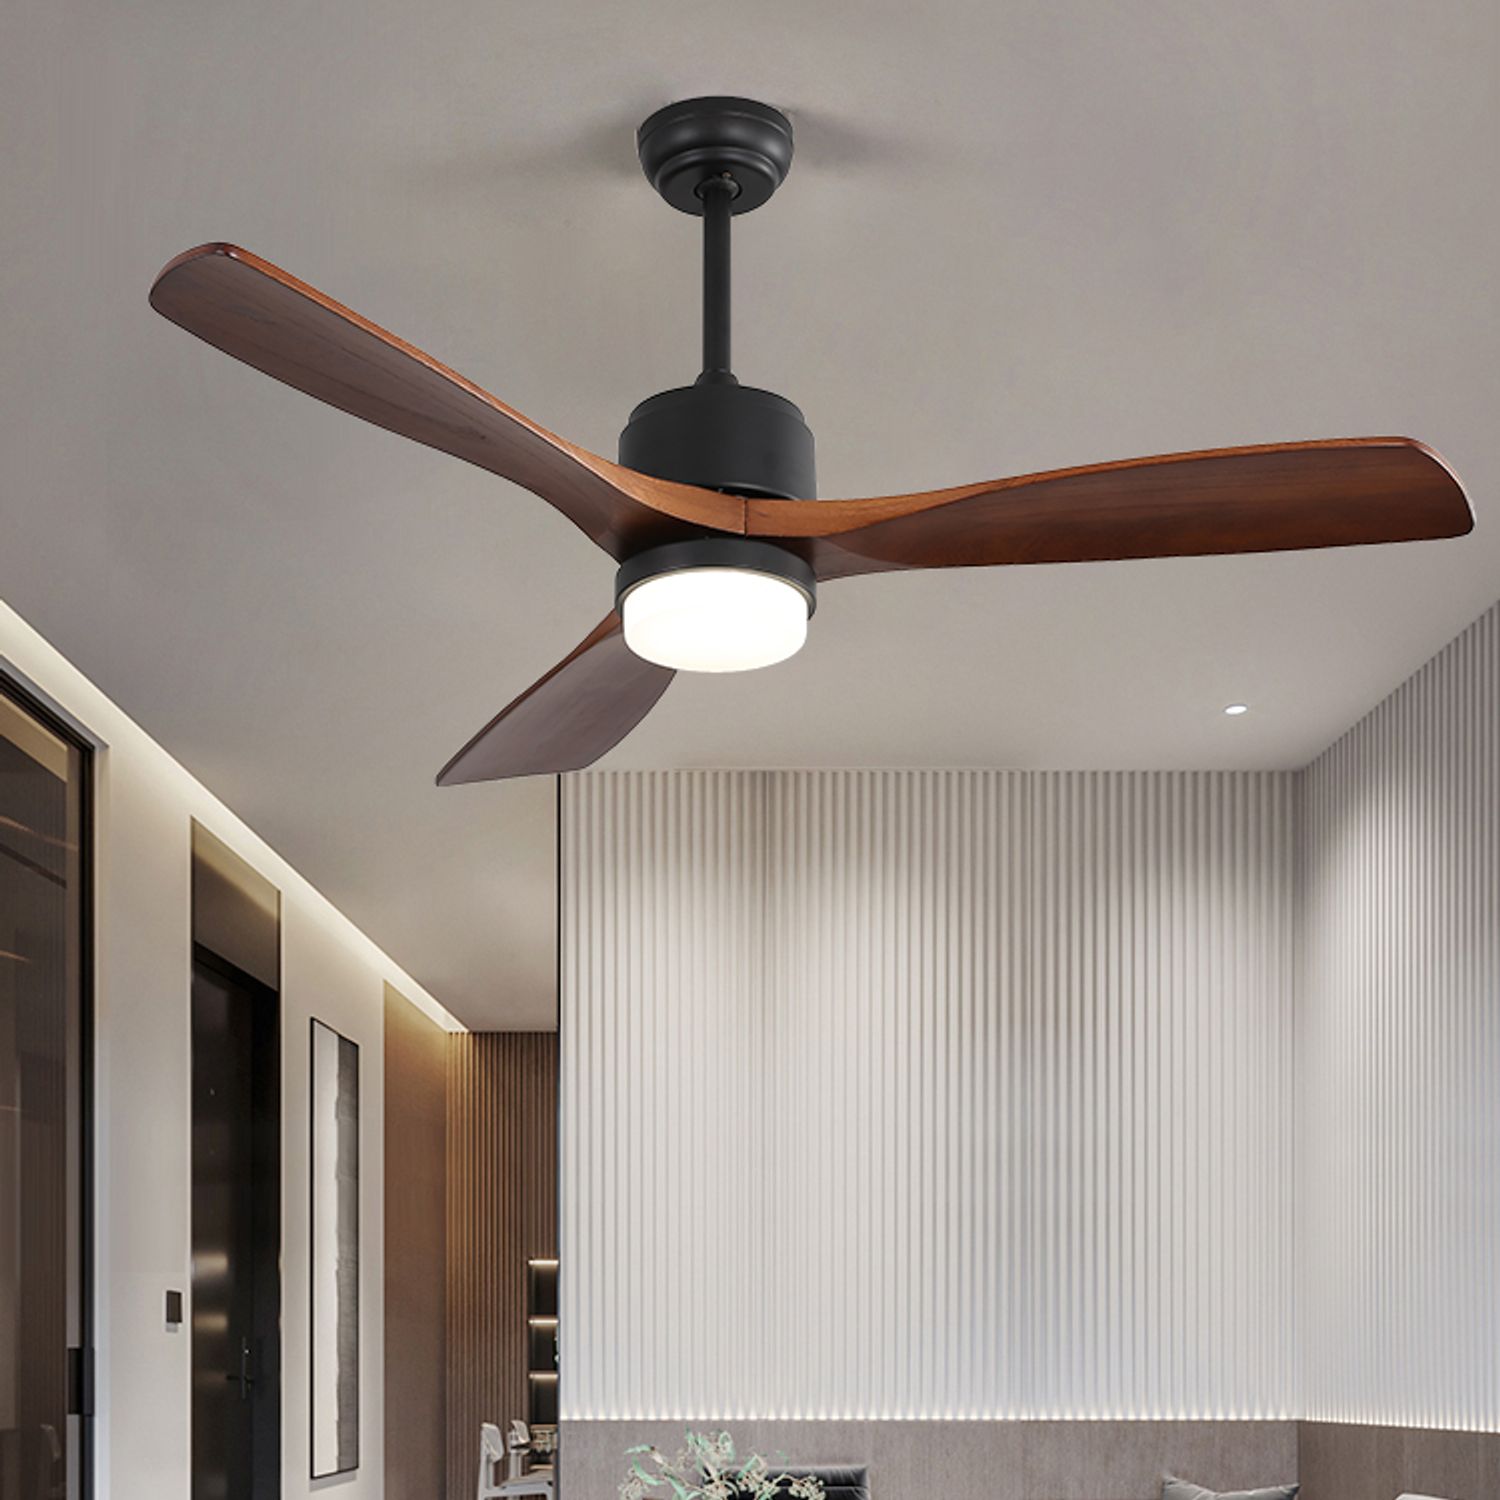 KBS quiet ceiling fans with lights and remote control in bedroom